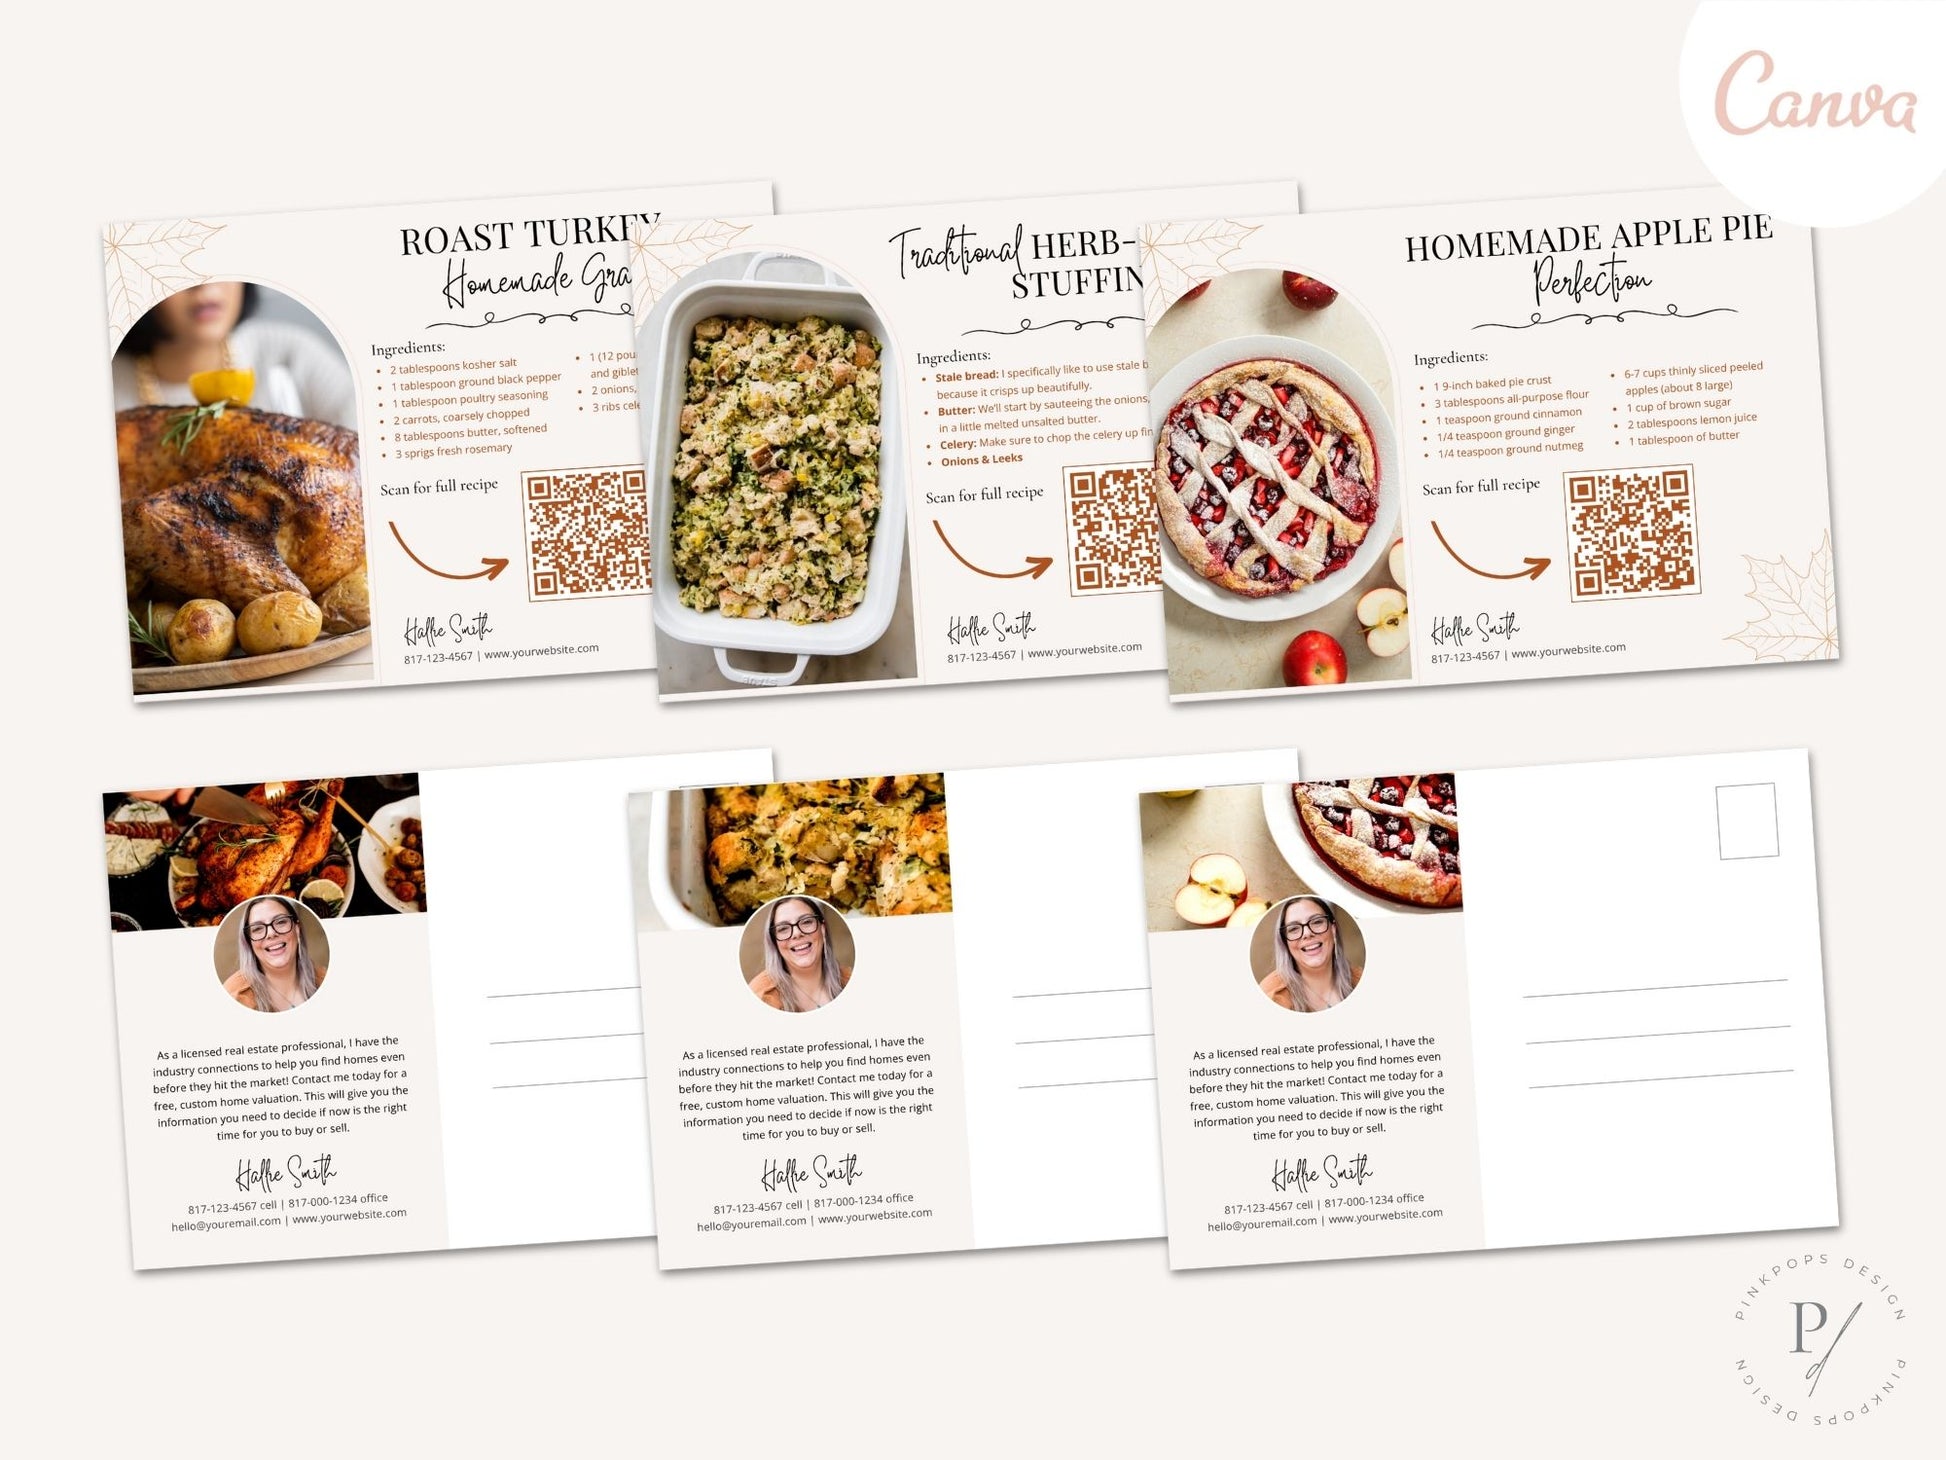 Real Estate Thanksgiving Recipe Postcard Bundle - Delightful bundle combining festive design with mouthwatering recipes for a unique and engaging way to express gratitude and connect with clients during the Thanksgiving season.